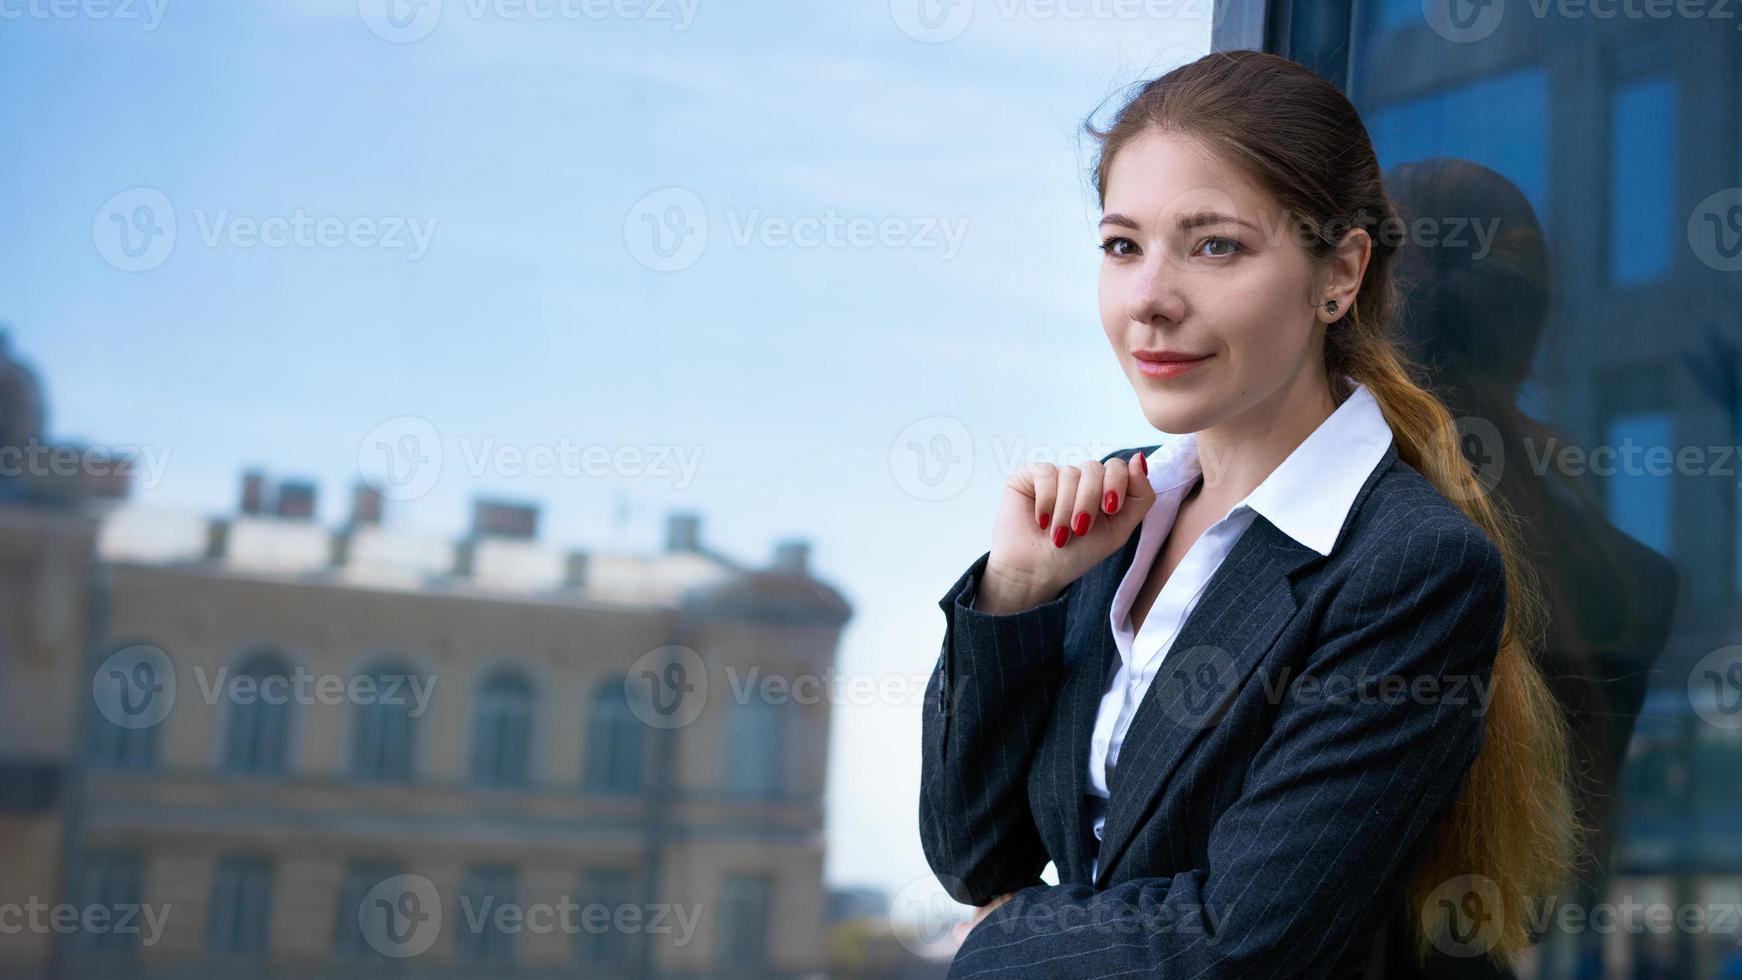 Young business woman of the office center on the street photo